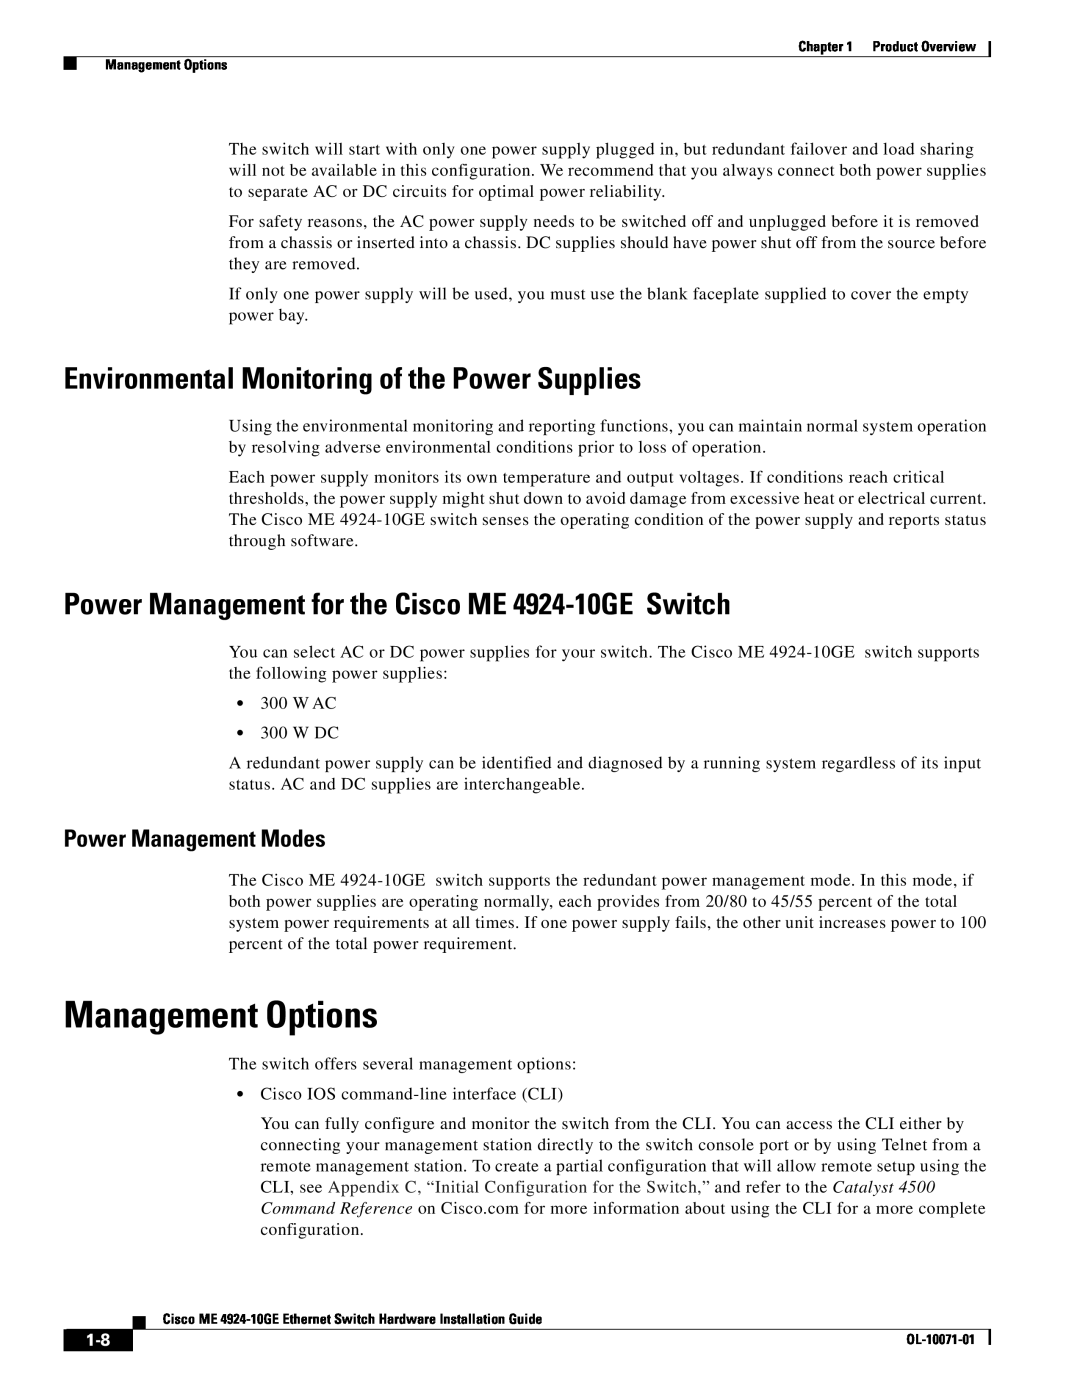 Cisco Systems ME 4924-10GE Management Options, Environmental Monitoring of the Power Supplies, Power Management Modes 